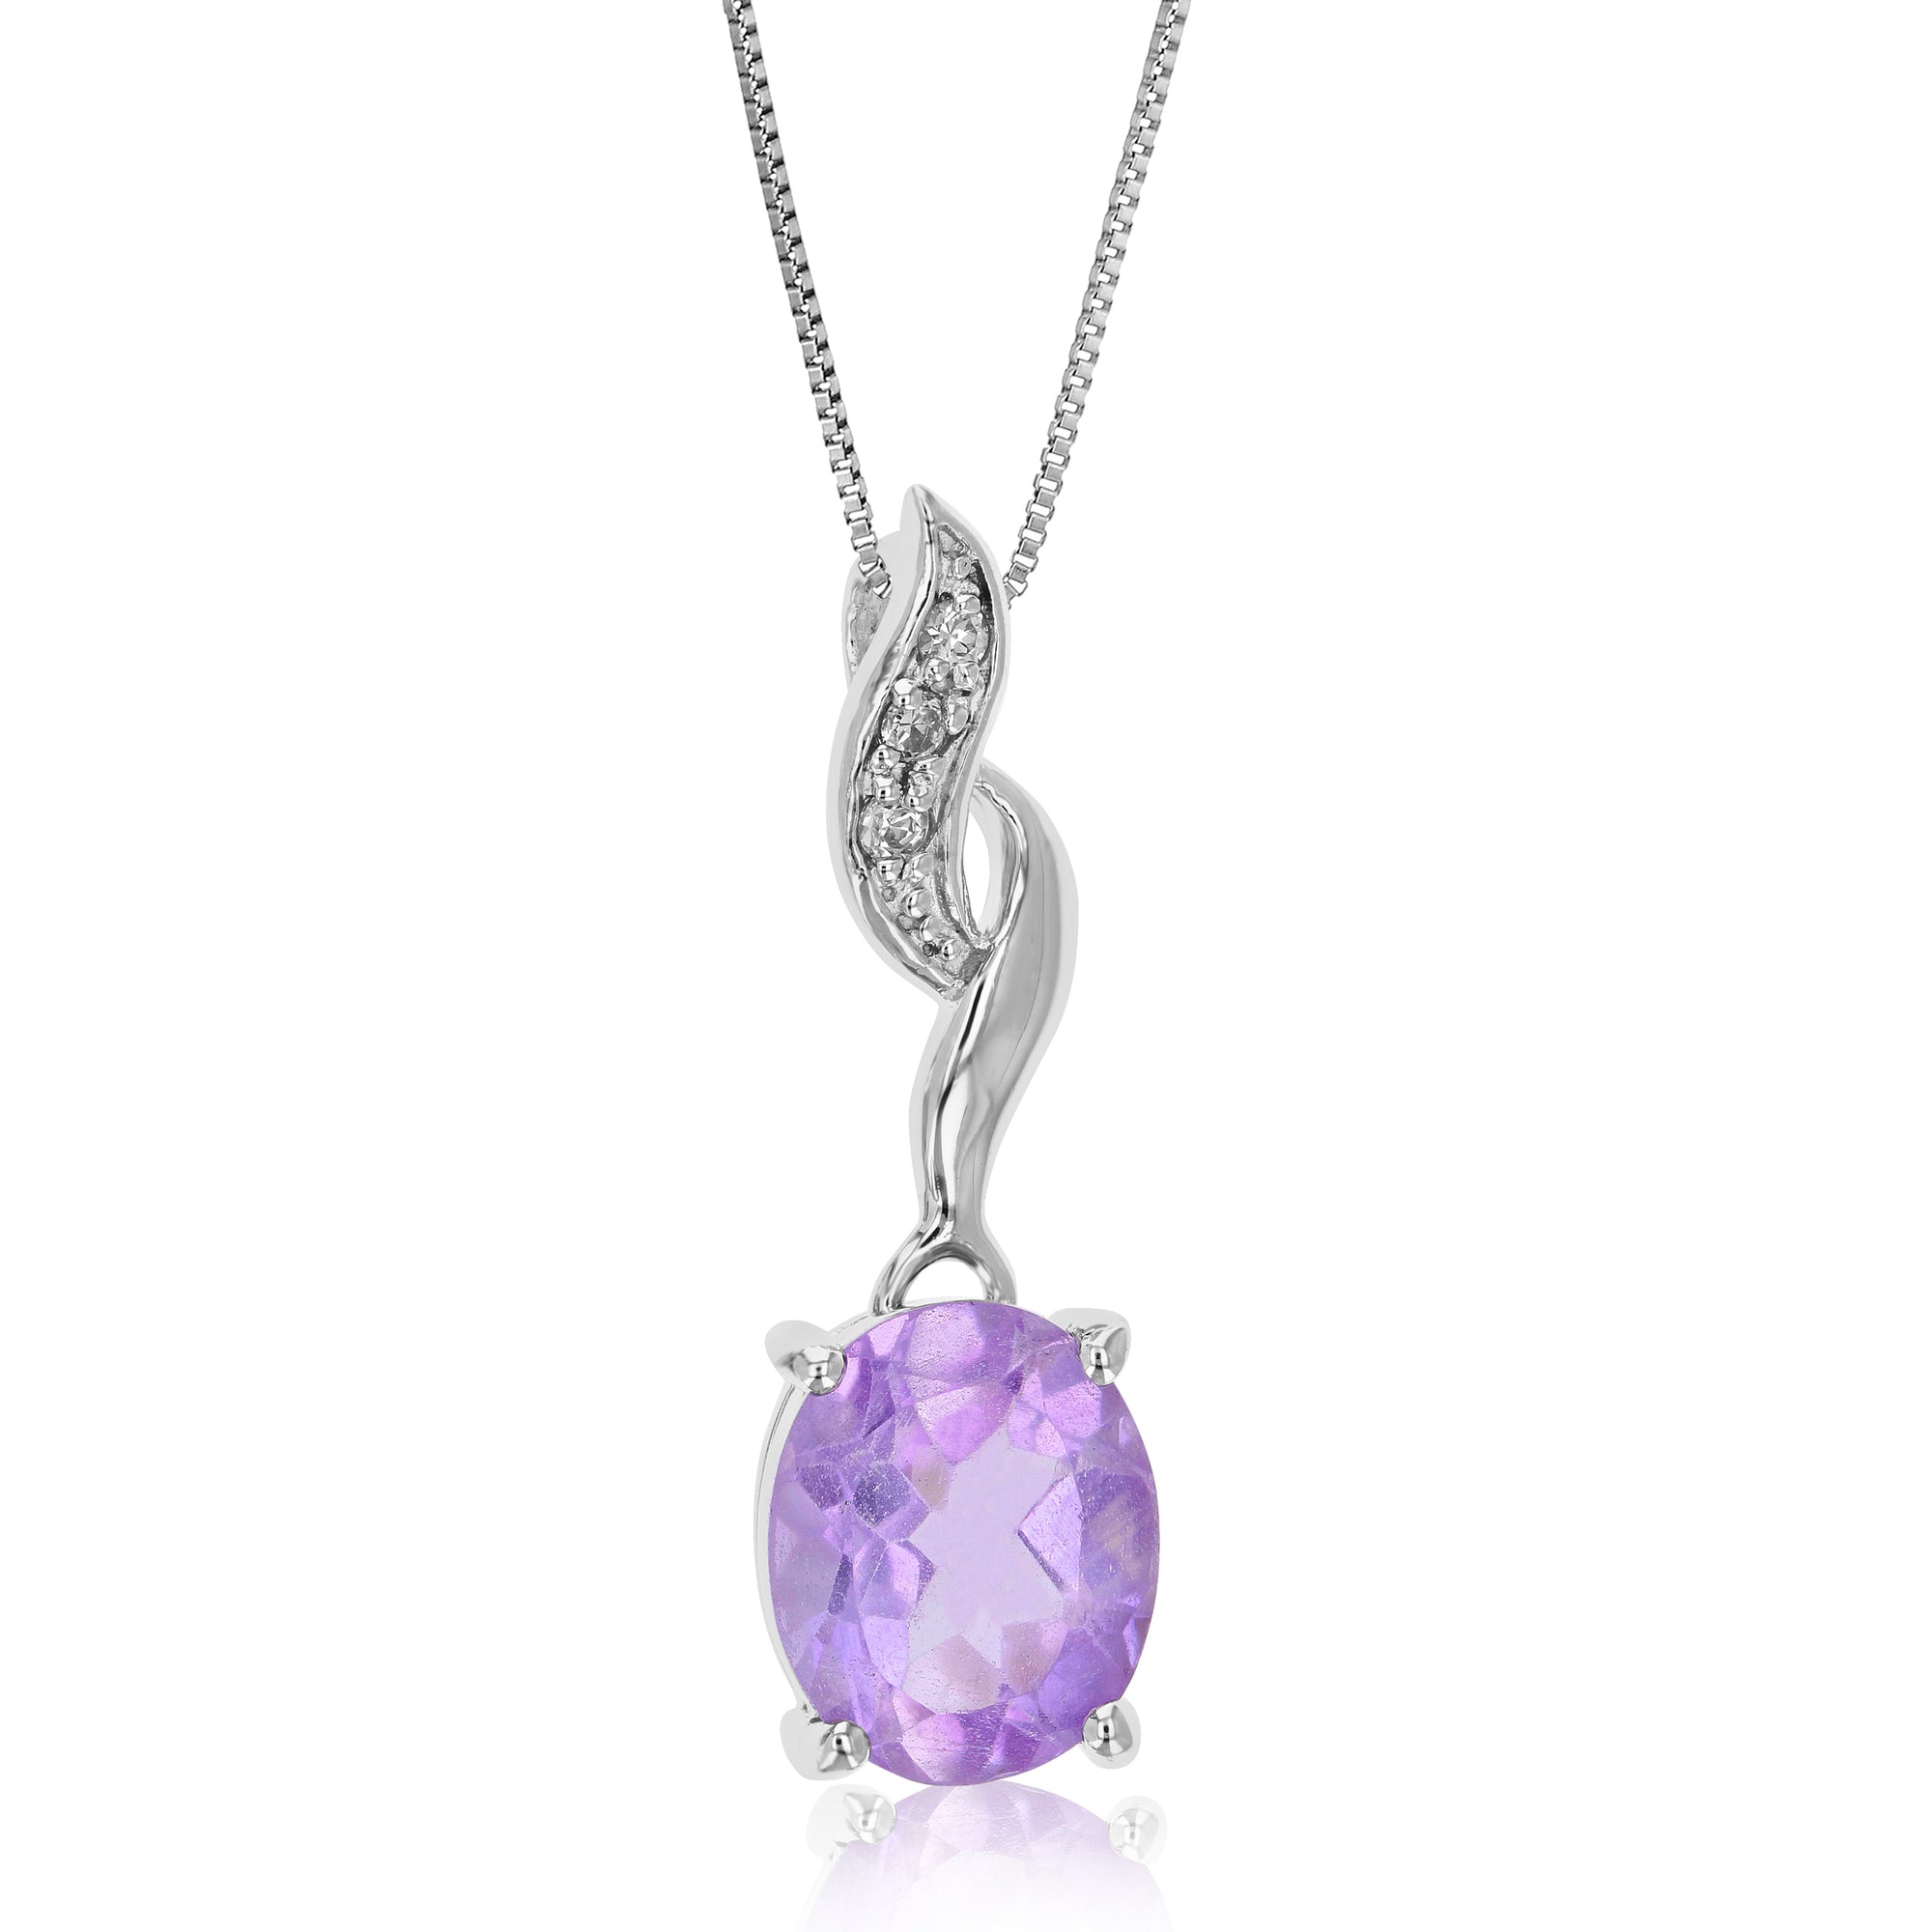 1.70 cttw Pendant Necklace, Purple Amethyst Oval Shape Pendant Necklace for Women in .925 Sterling Silver with Rhodium, 18 Inch Chain, Prong Setting